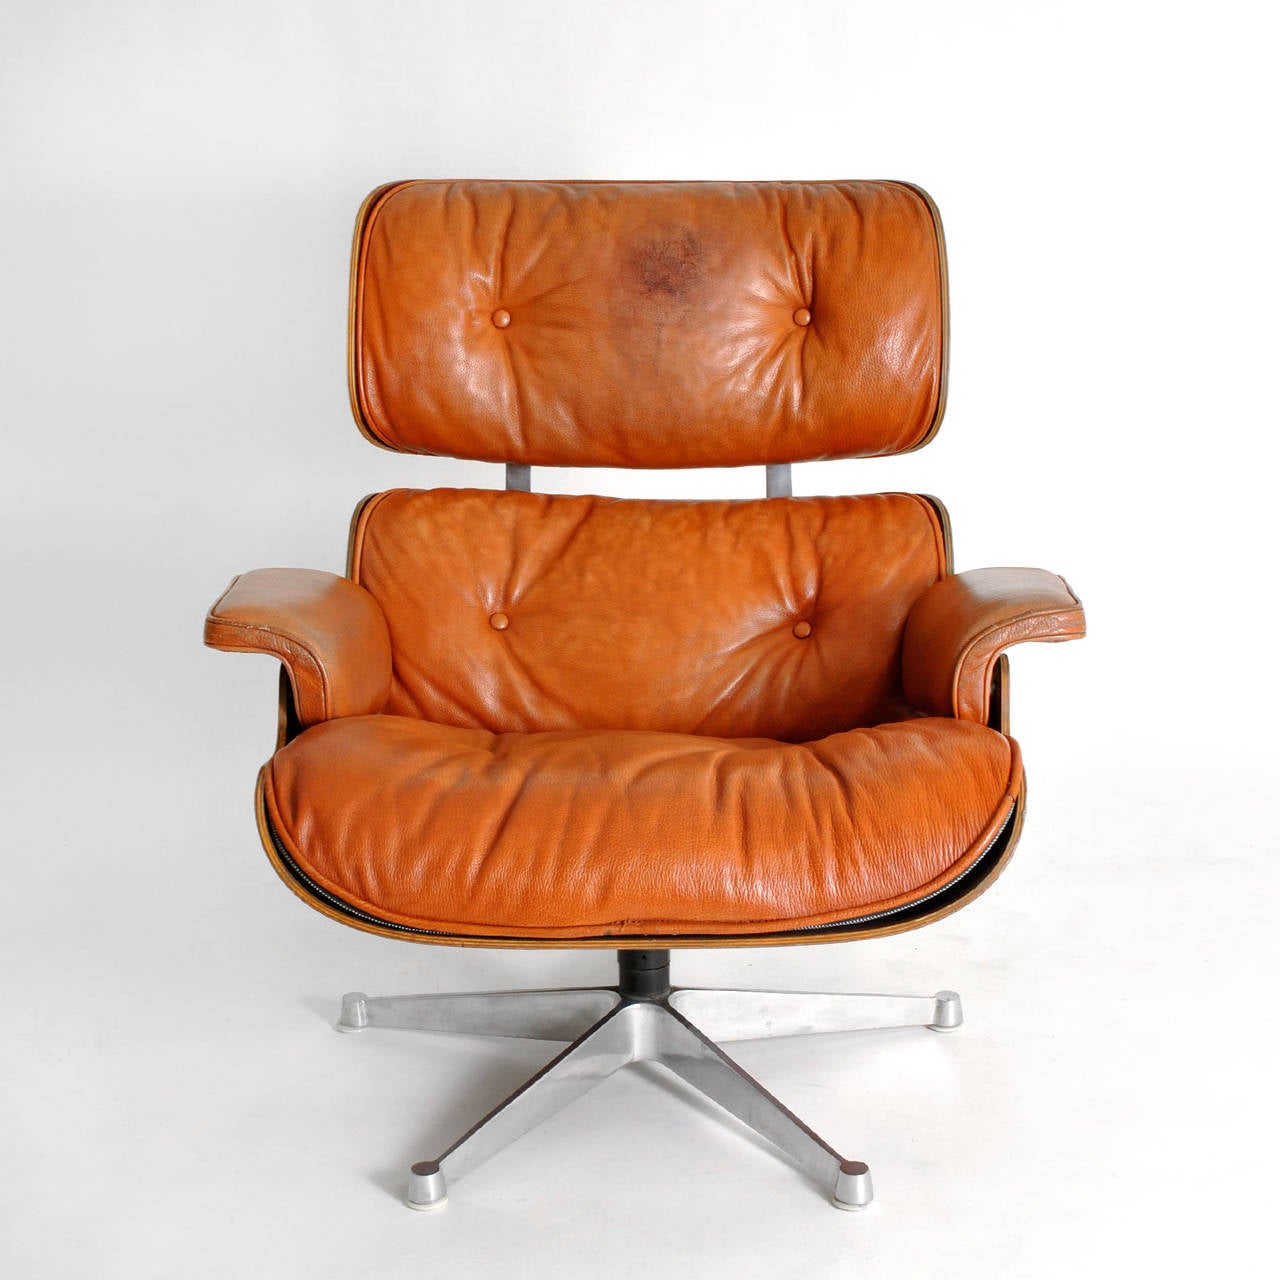 American Lounge Chair and Ottoman by Charles & Ray Eames